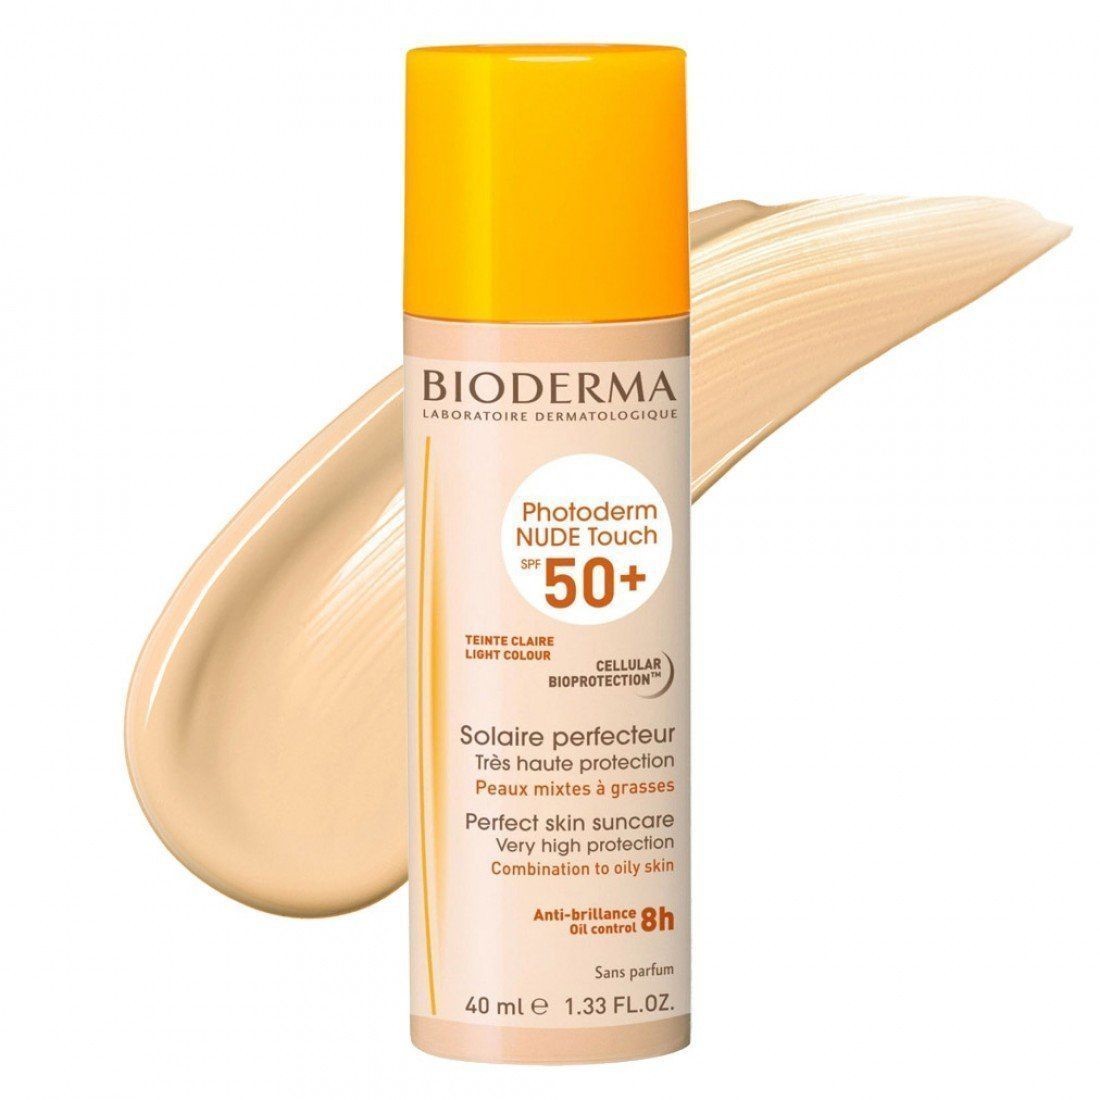 Bioderma Photoderm Nude Touch SPF 50+.